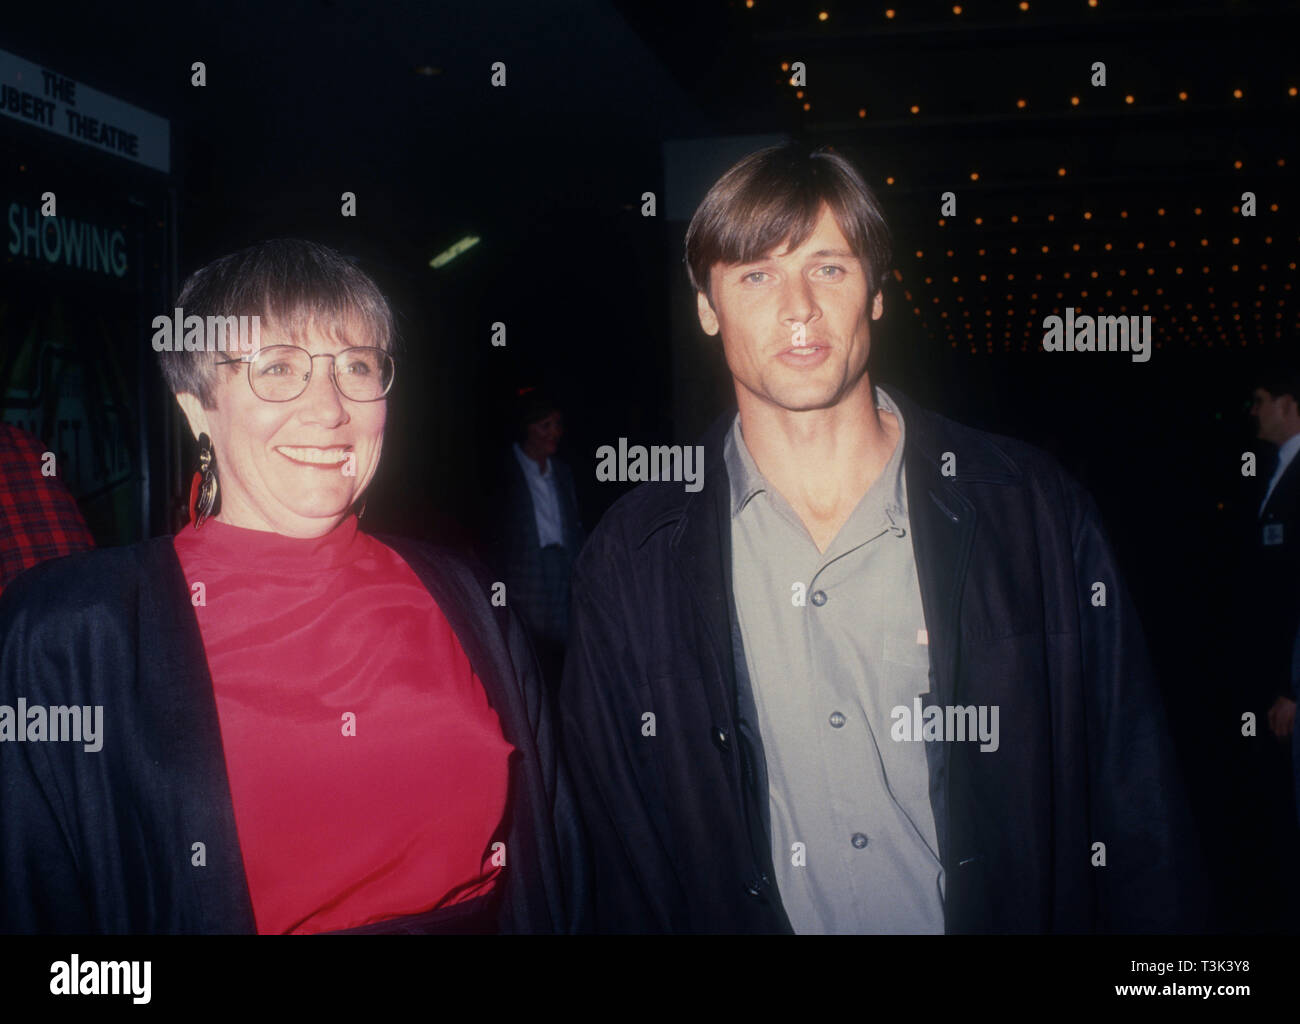 Century City, California, USA 16th March 1994 Actor Grant Show and mother Kathleen Show attend Universal Pictures 'The Paper' Premiere on March 16, 1994 at Cineplex Odeon Century Plaza Cinemas in Century City, California, USA. Photo by Barry King/Alamy Stock Photo Stock Photo